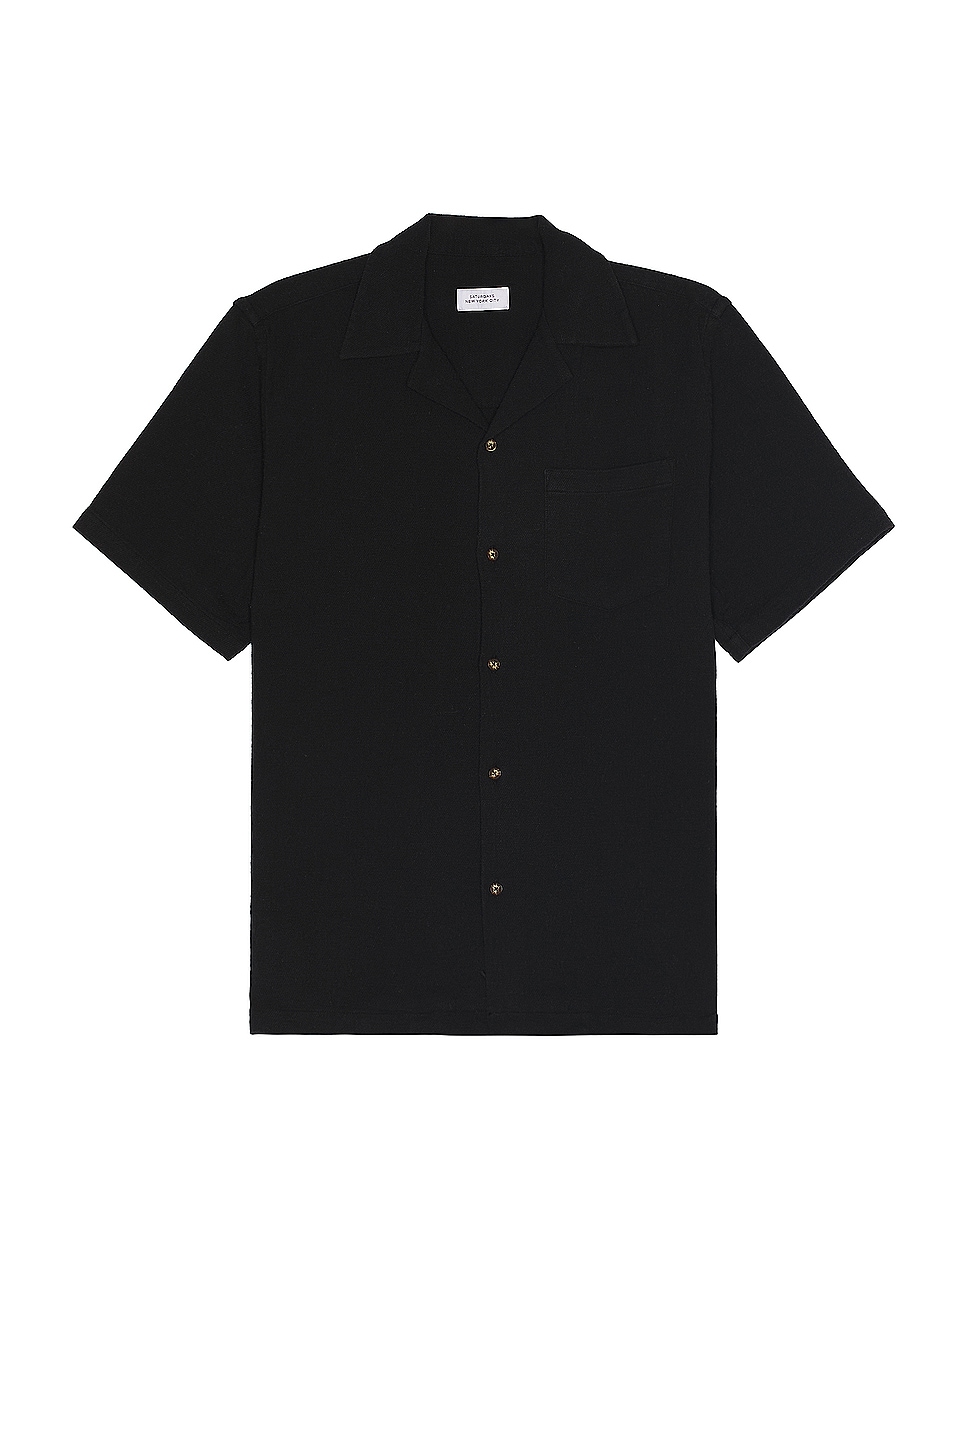 Image 1 of SATURDAYS NYC Canty Boucle Knit Short Sleeve Shirt in Black